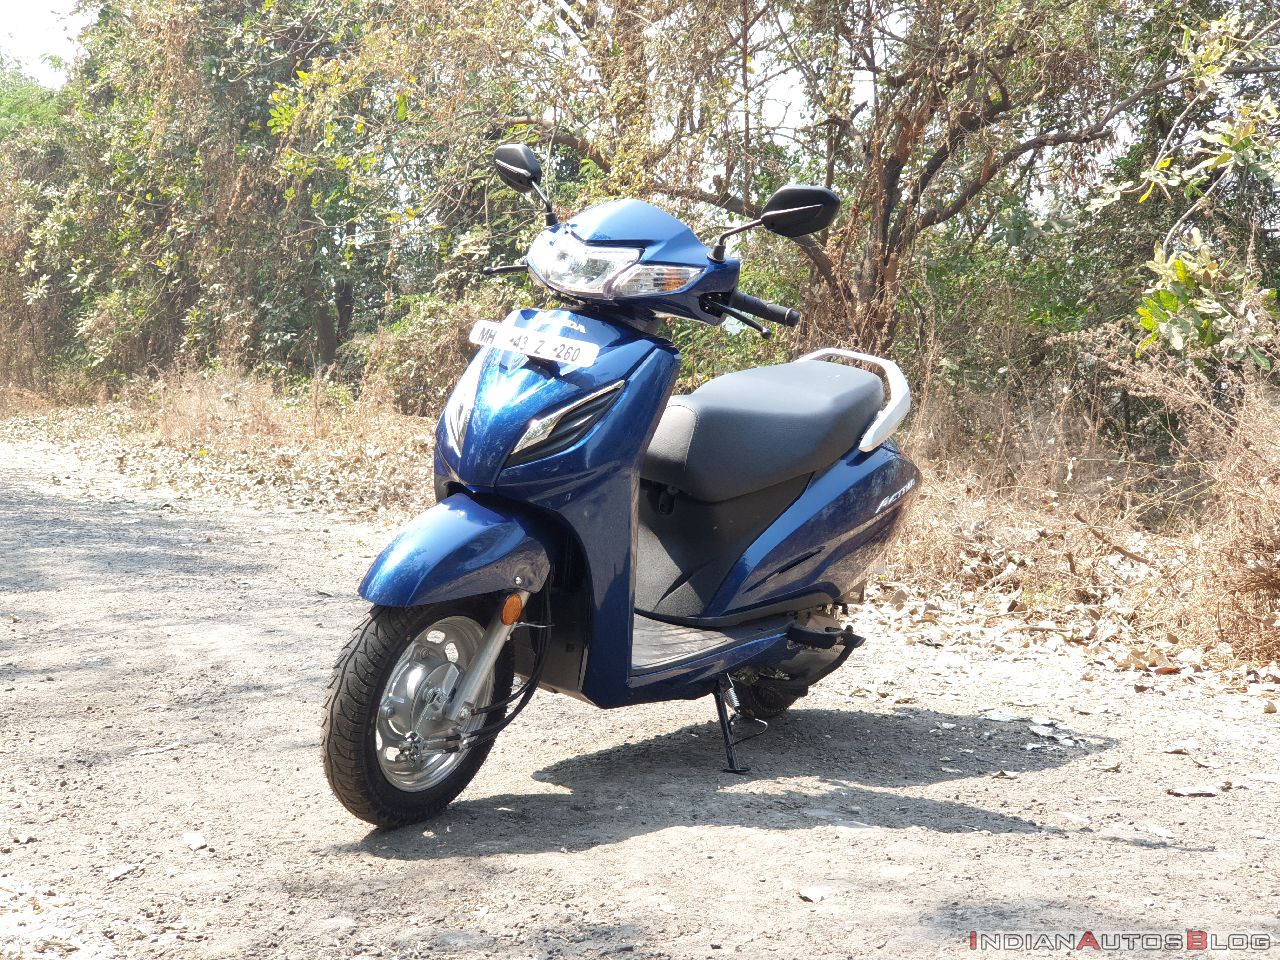 Replace my old Activa with Activa 6G or consider Access 125/Honda Dio